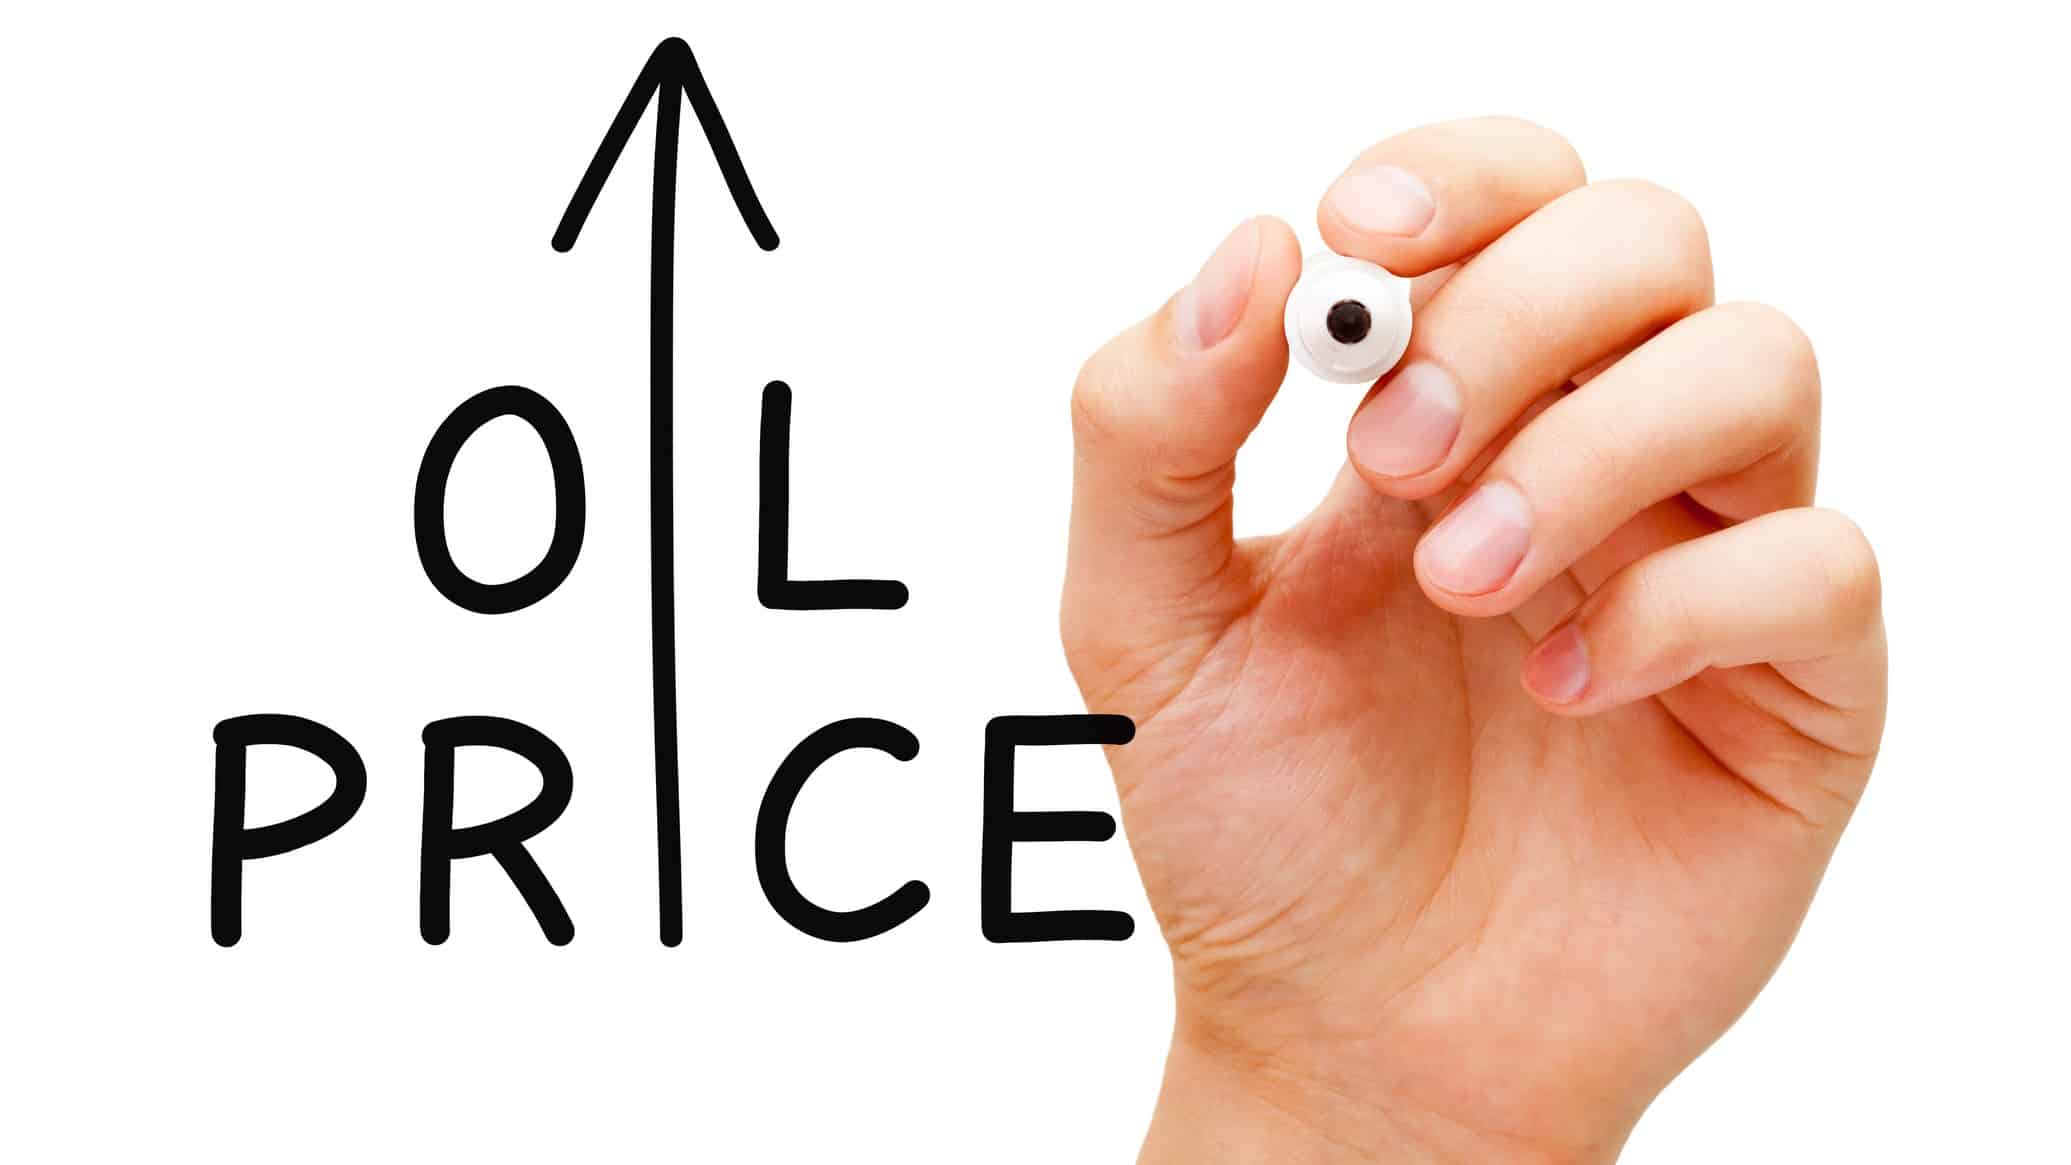 a hand holding a marker pen sits alongside a hand written sign that says OIL PRICE with an upward arrow taking the place of the I in both the words OIL and PRICE.